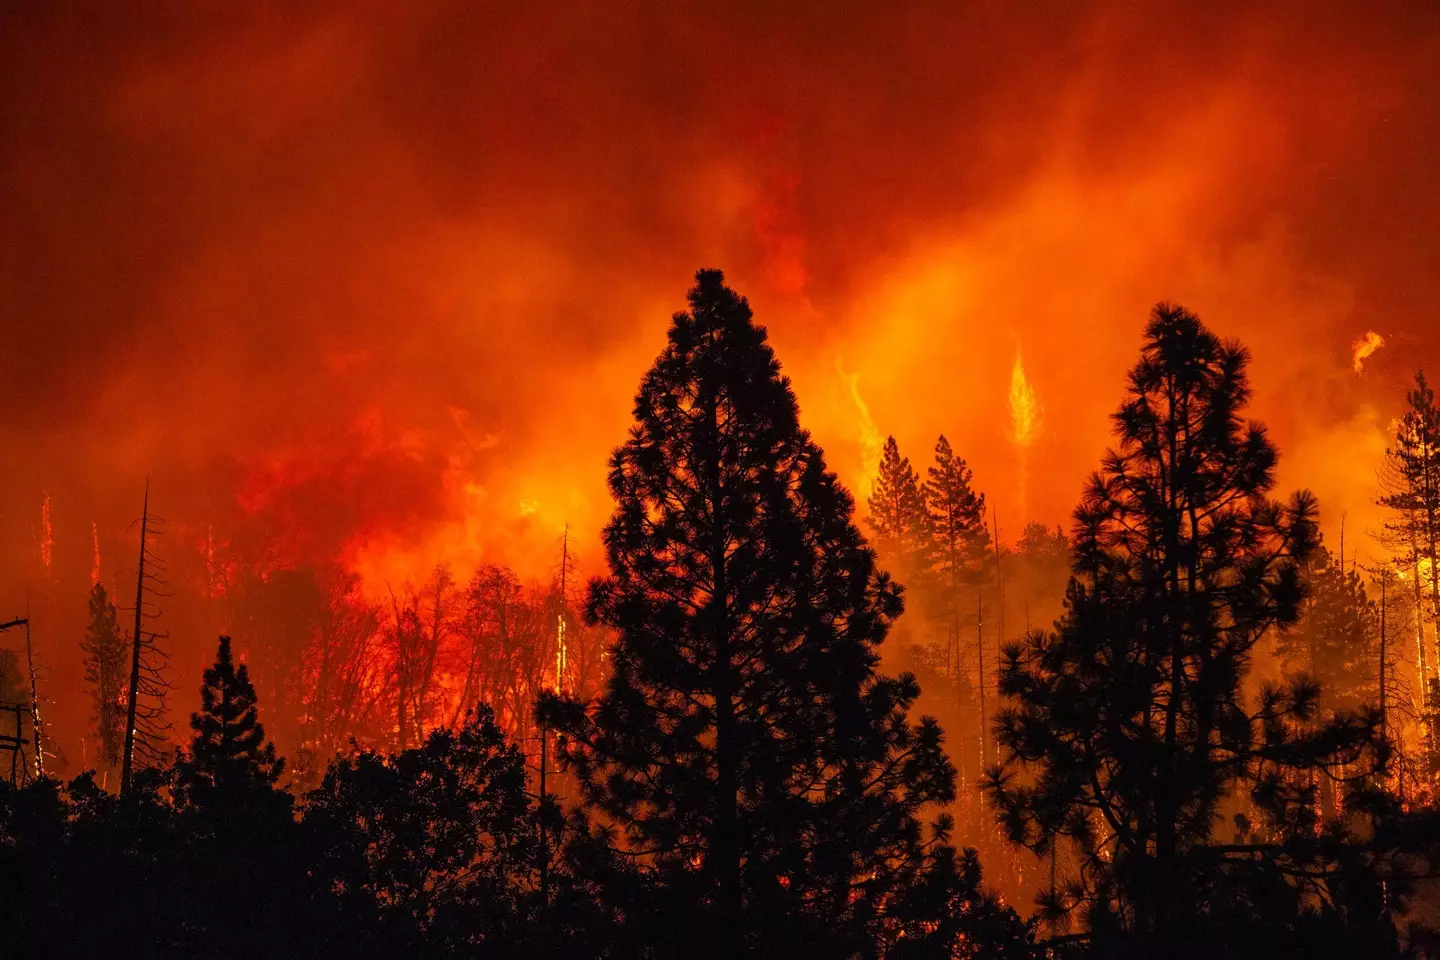 A Californian wildfire near Yosemite National Park has almost doubled in size in just one day.